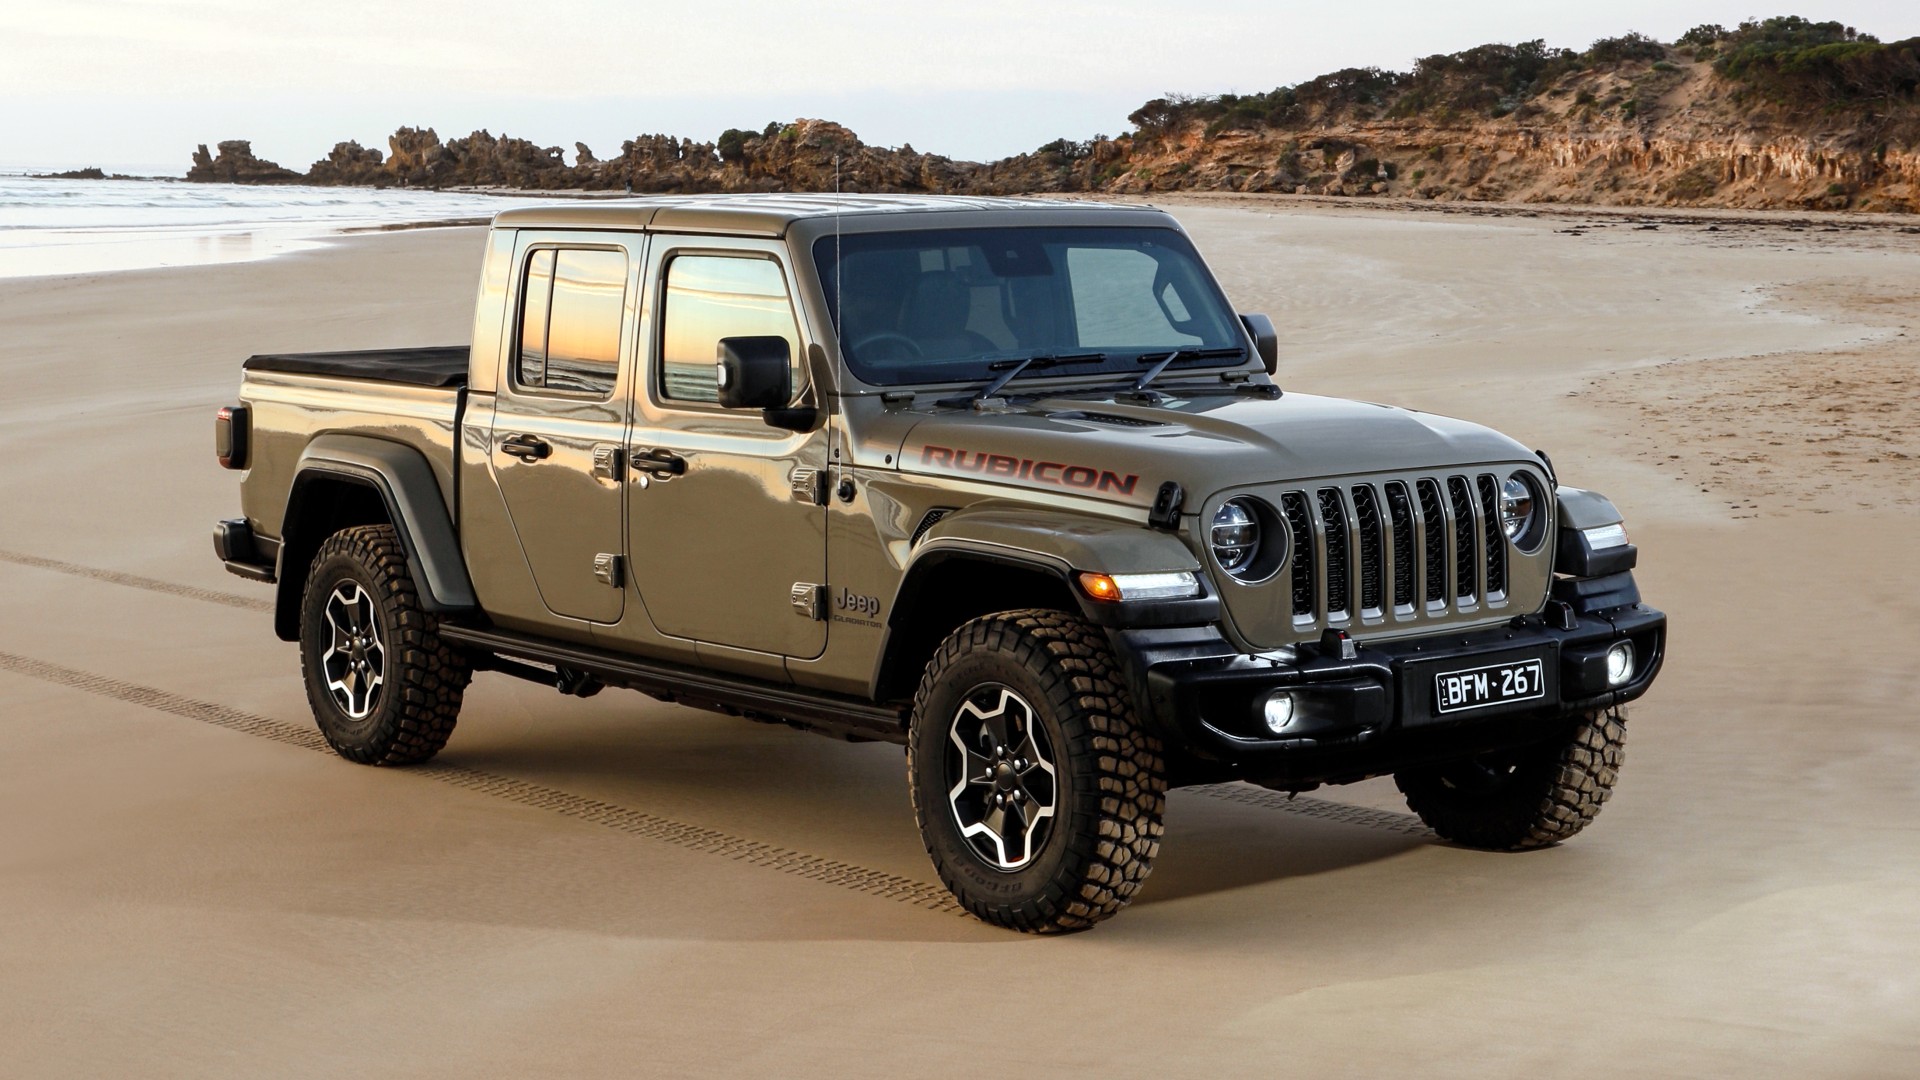 2020 jeep gladiator 2020 jeep gladiator debuts in la – best of both worlds 2020 jeep